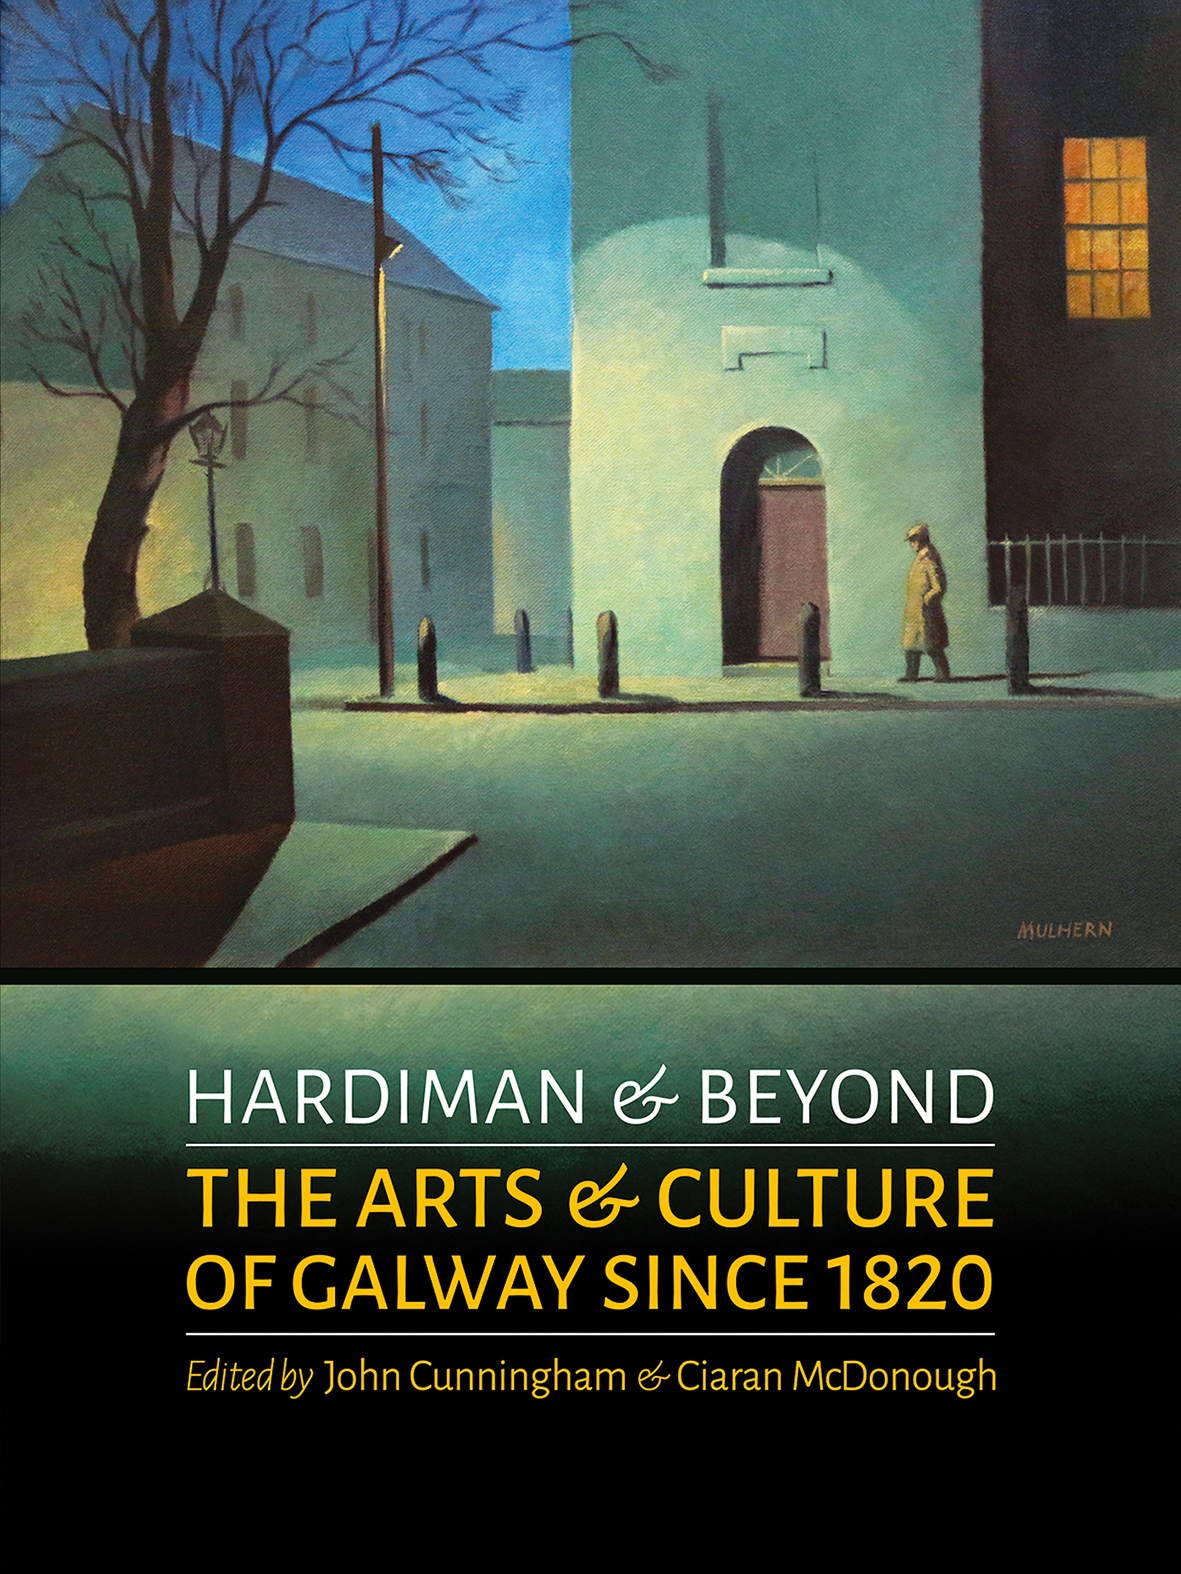 Hardiman & Beyond: The Arts and Culture of Galway Since 1820 | John Cunningham & Ciaran Mc Donagh | Charlie Byrne's